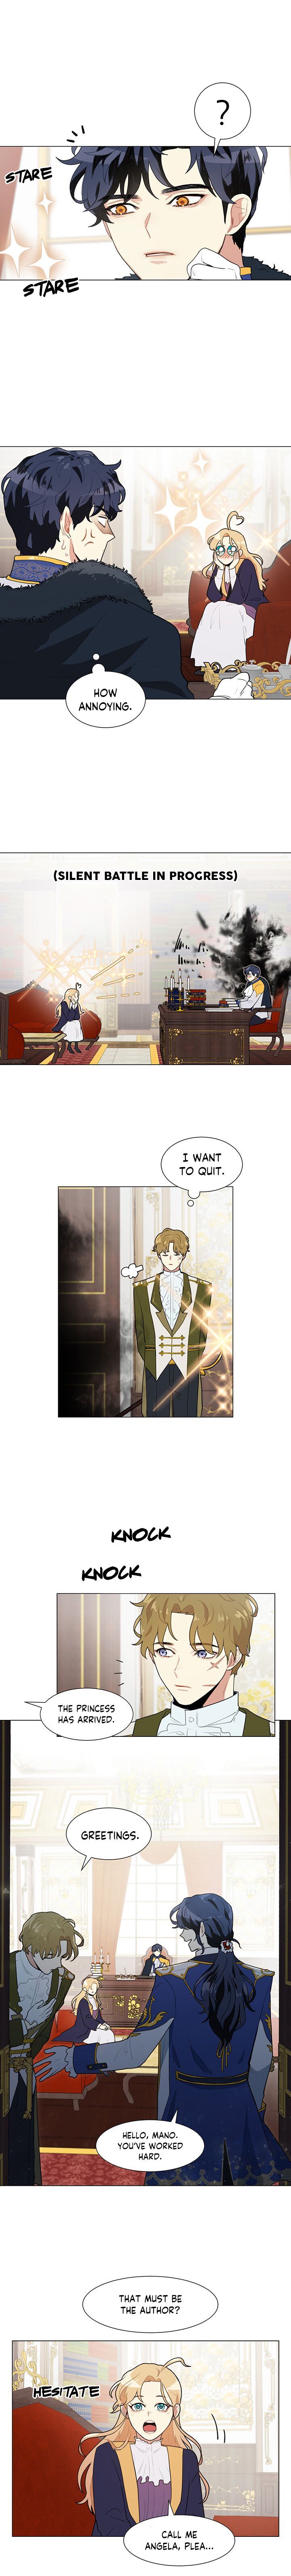 I'm Stanning the Prince Chapter 004 page 3